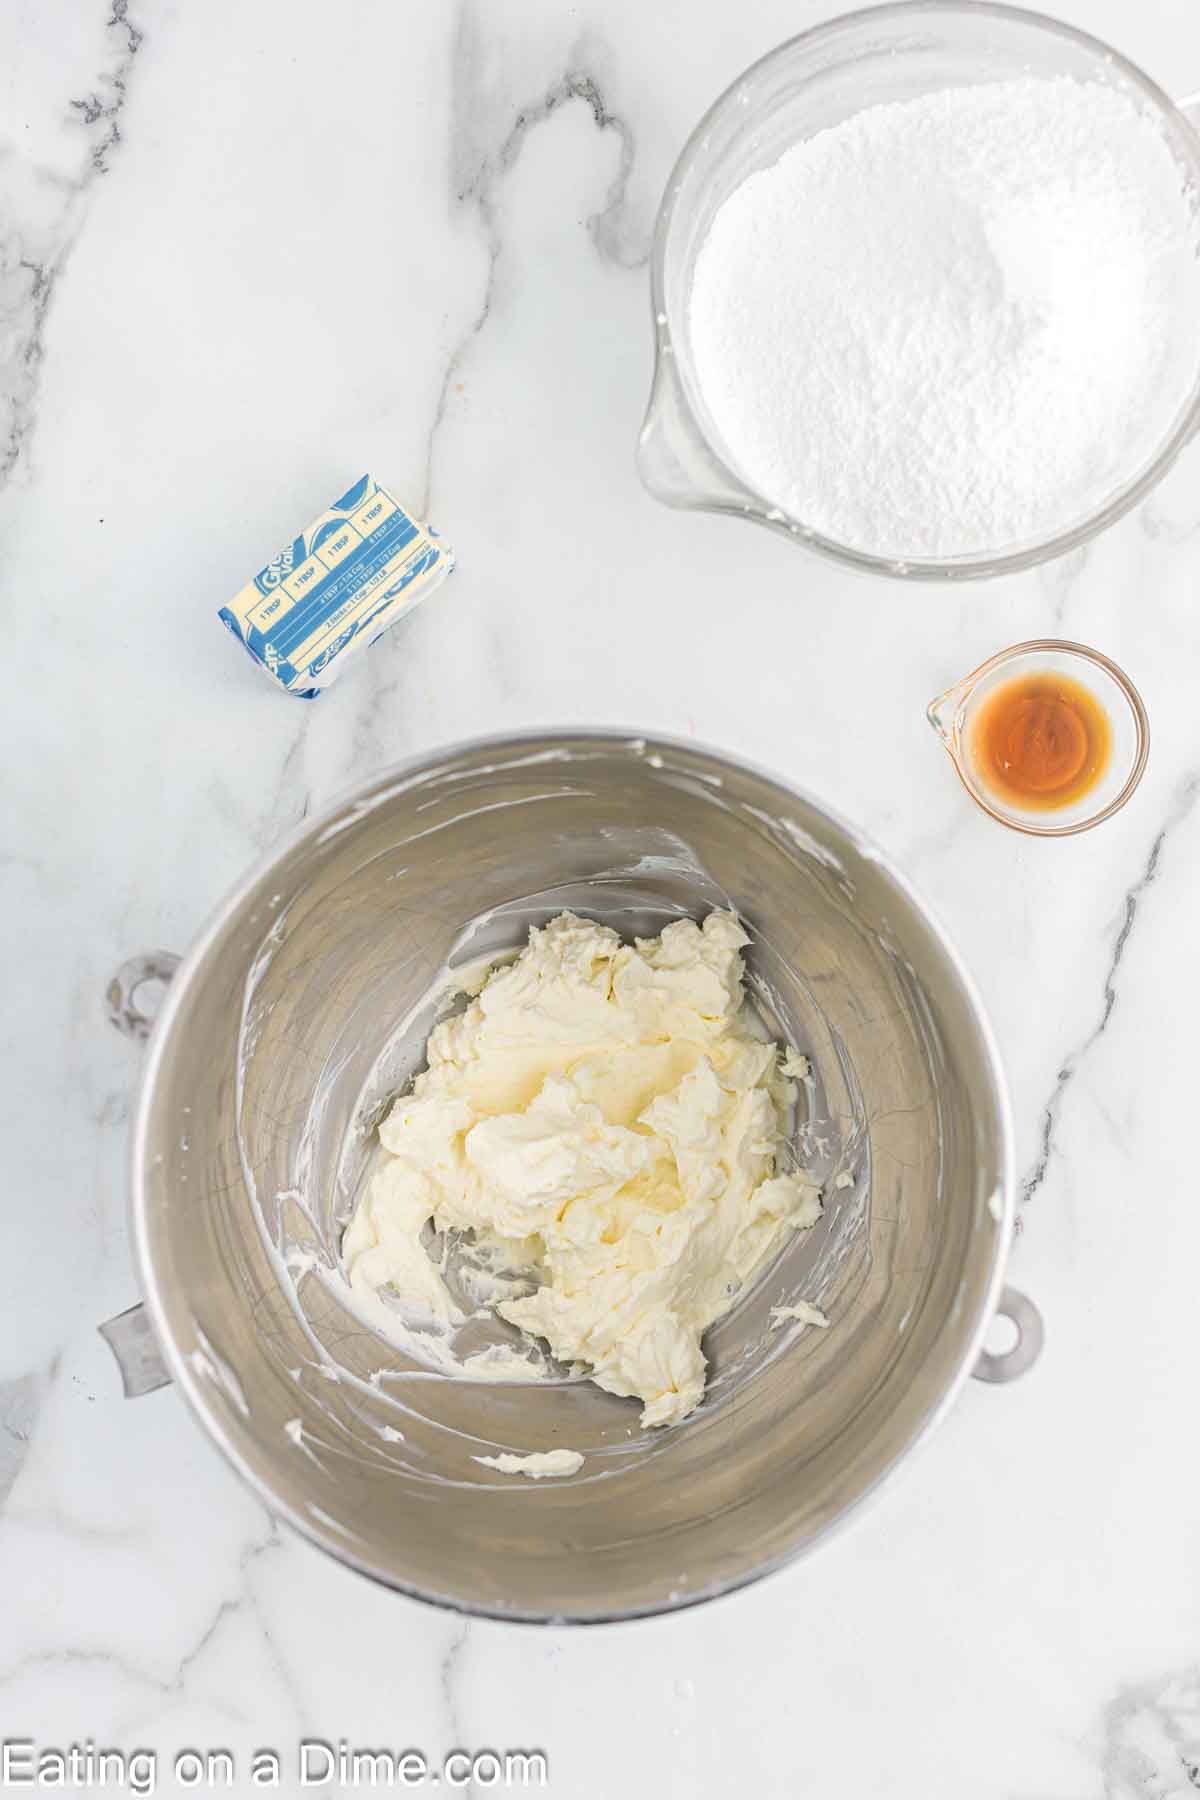 Beating the cream cheese in a bowl